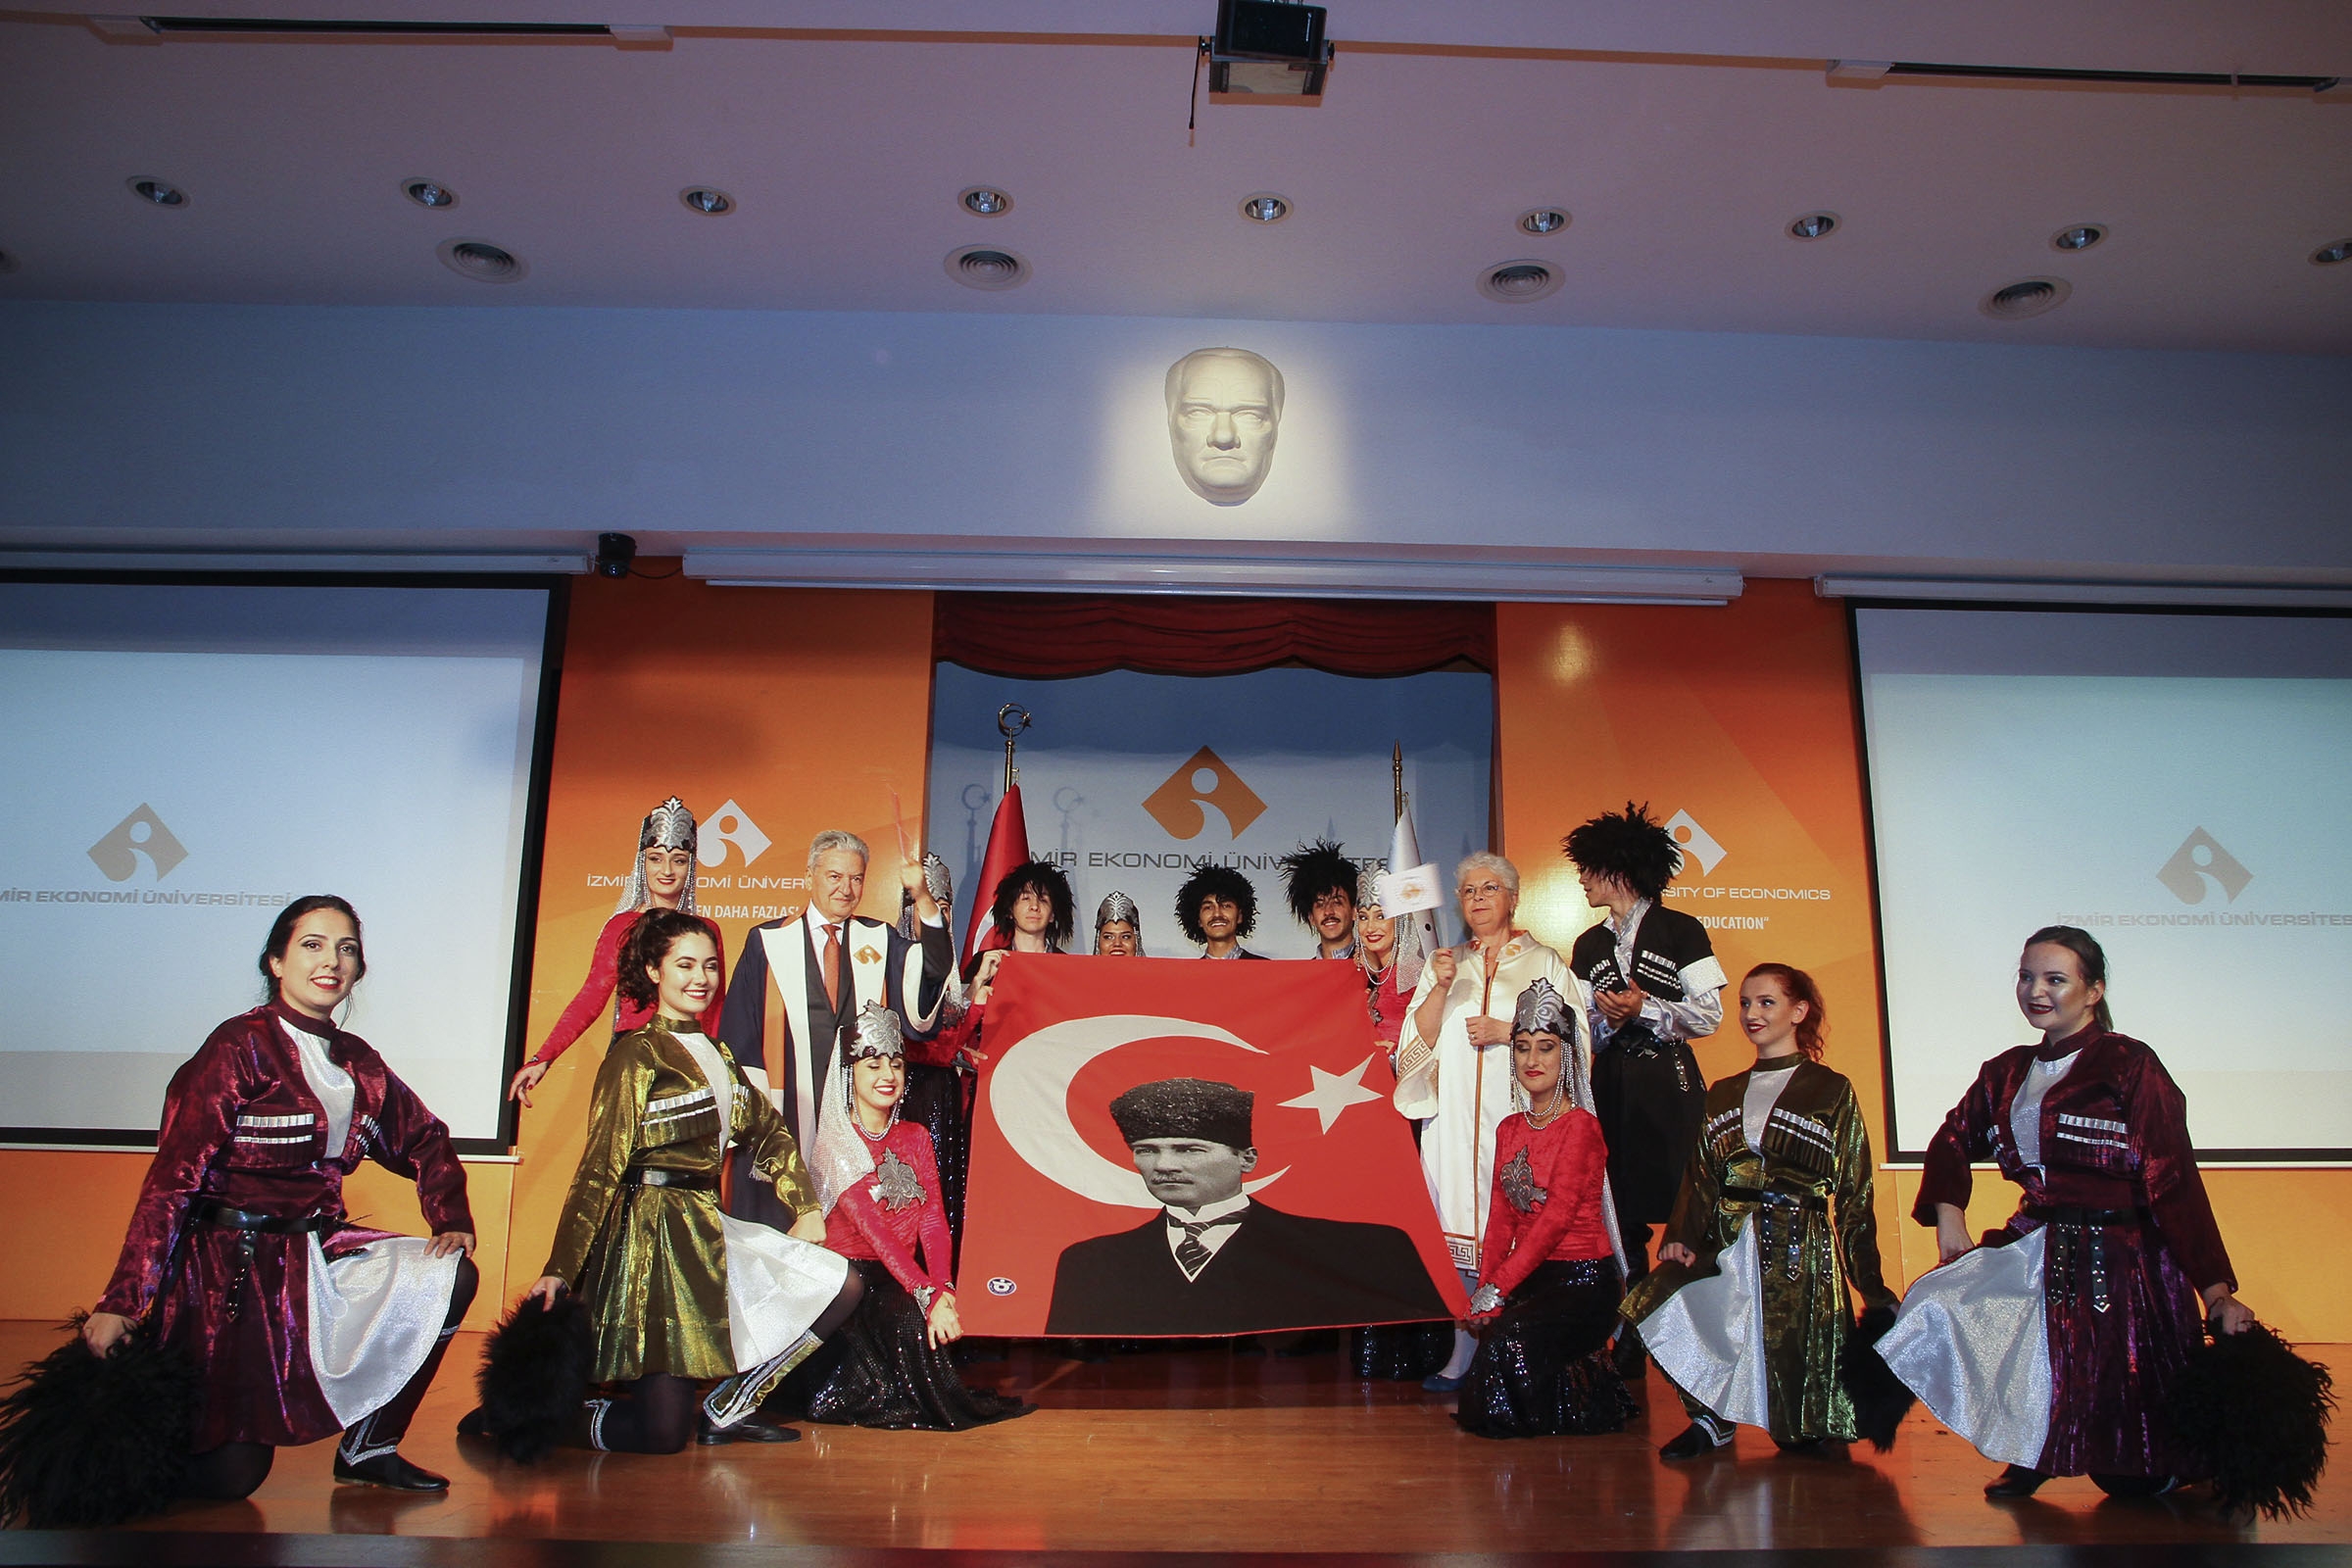 IZMIR UNIVERSITY OF ECONOMICS STARTED ITS 17th YEAR WITH ENTREPRENEURS AND PHYSICIANS 